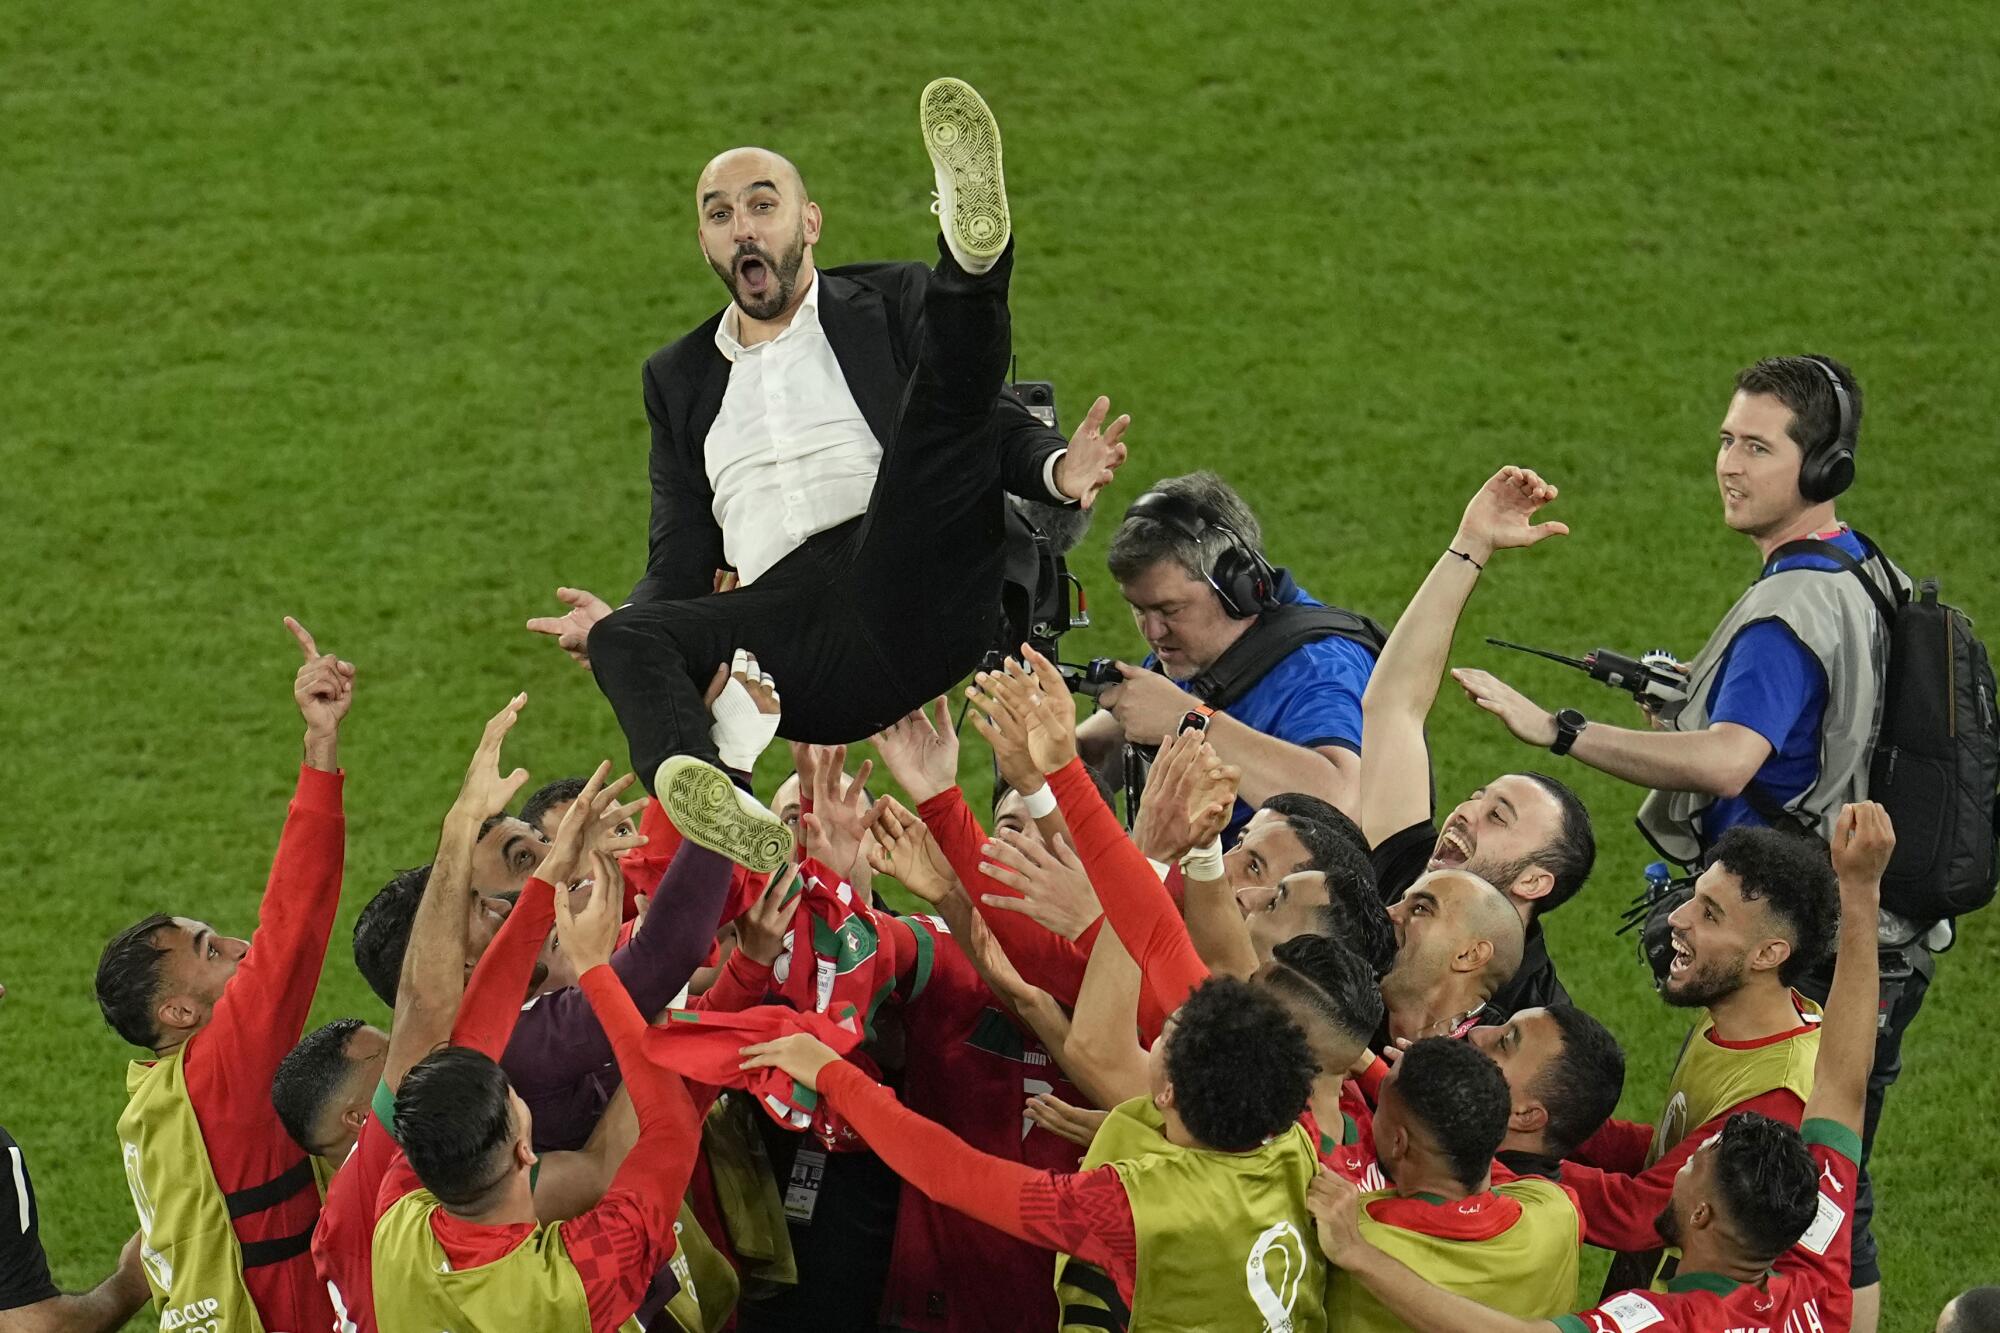 Morocco coach Walid Regragui is thrown in the air by players celebrating the team's historic World Cup win over Spain 